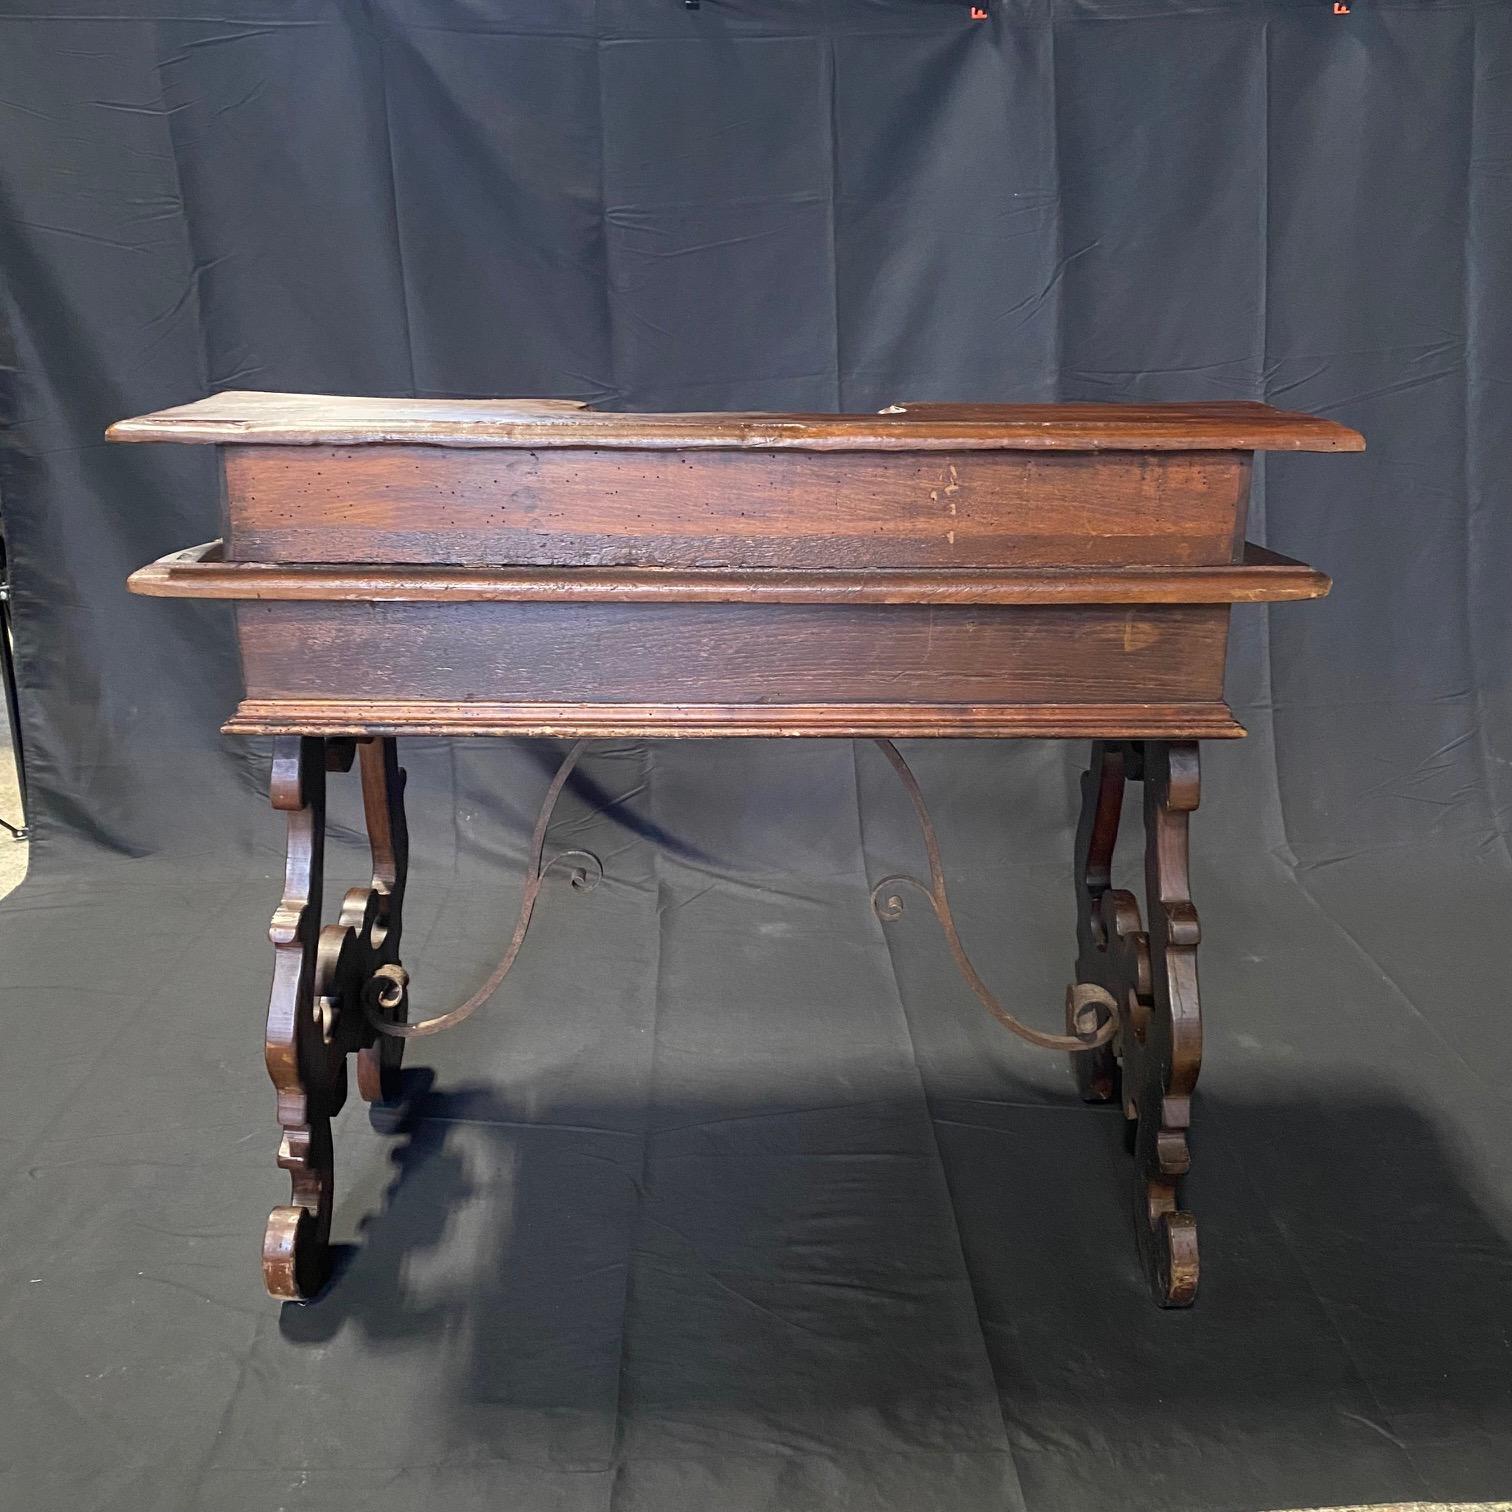 An Italian Baroque style walnut writing desk table with drawers and lyre shaped base legs and beautiful hand crafted wrought-iron stretchers. Created in Italy during the early years of the 19th century, this walnut writing desk or table features a